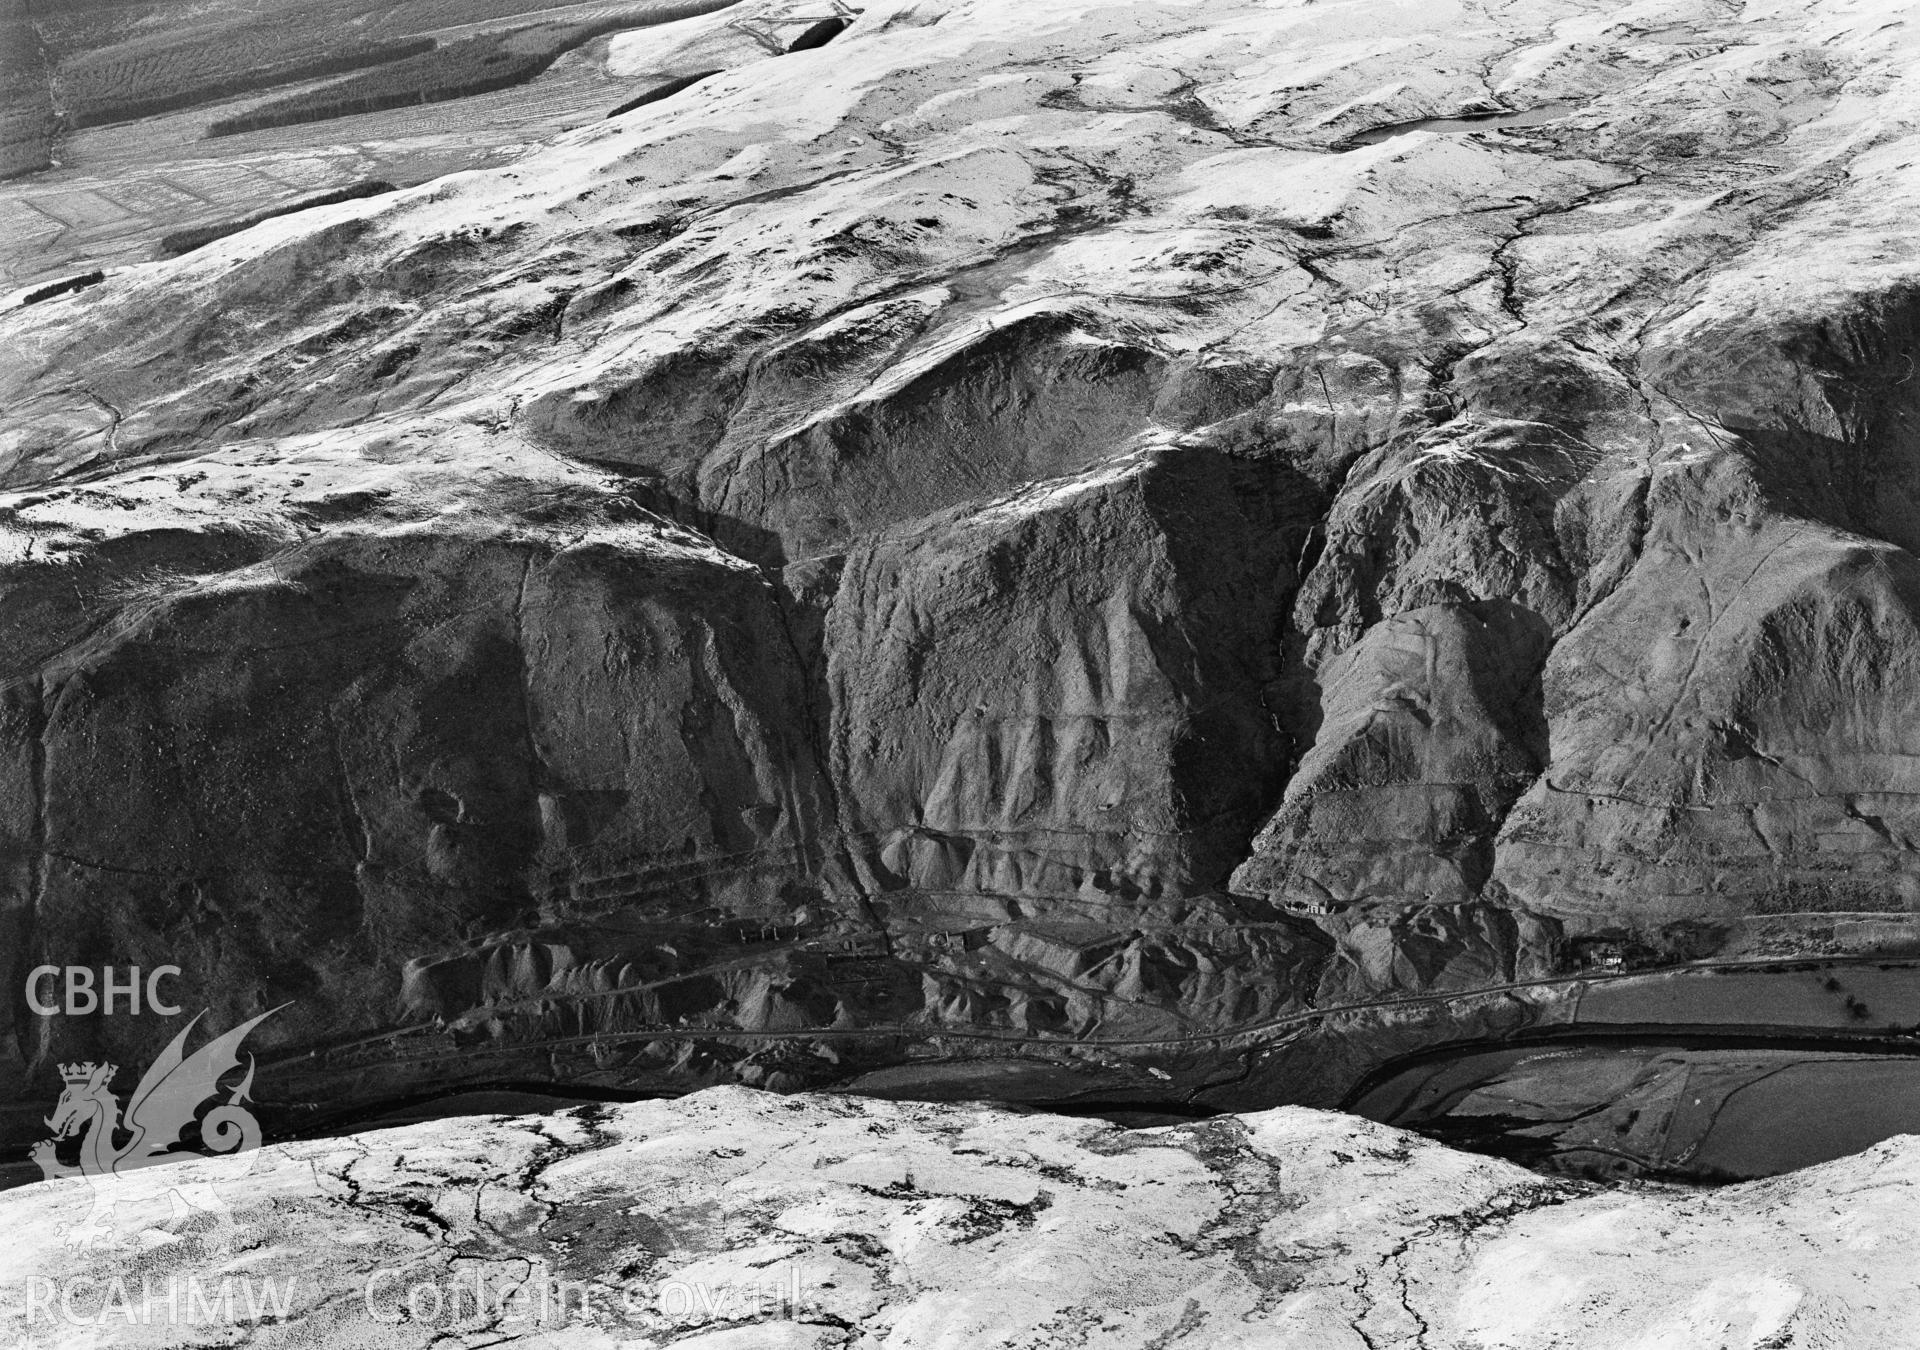 RCAHMW Black and white oblique aerial photograph of Cwmystwyth Leadmines, Pontarfynach, taken on 11/01/1999 by Toby Driver